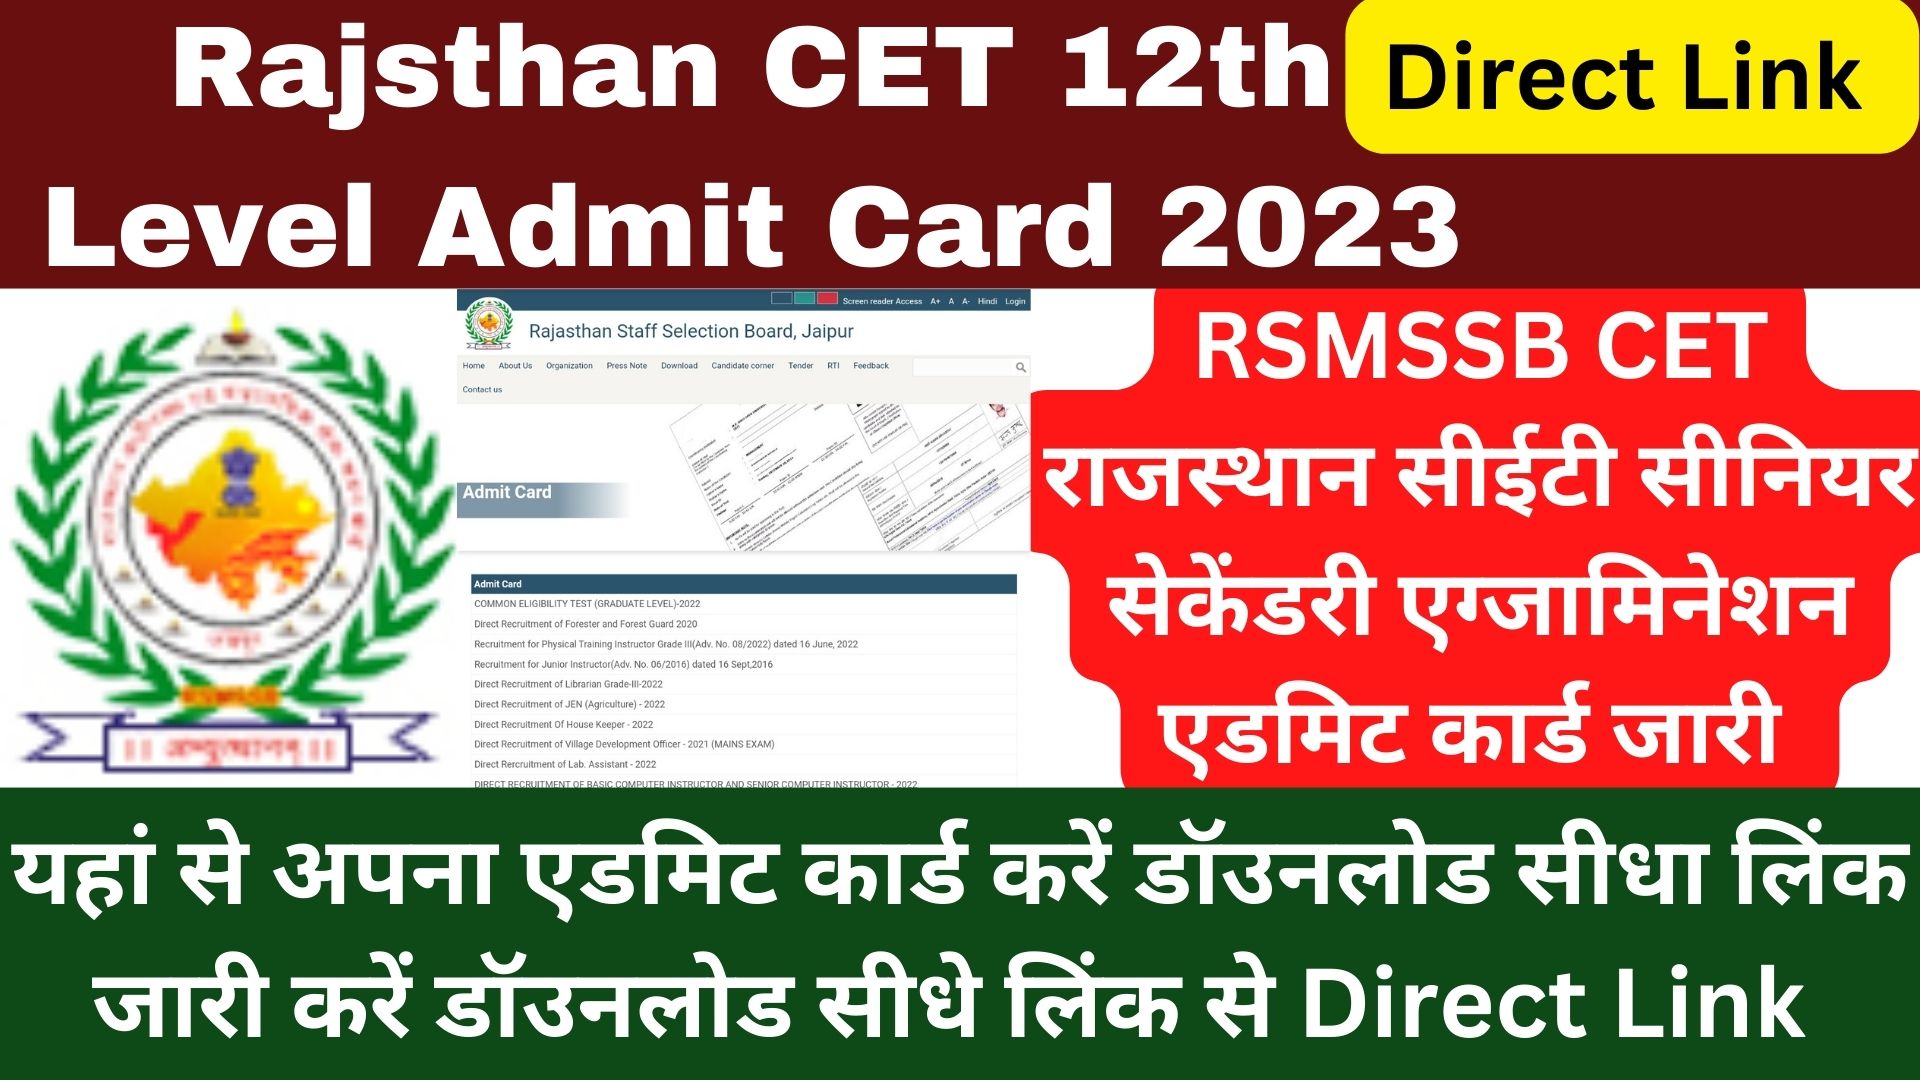 Rajsthan CET 12th Level Admit Card 2023 2 Rajsthan CET 12th Level Admit Card 2023, Out Exam,Hall ticket, direct link राजस्थान सीईटी सीनियर सेकेंडरी एग्जामिनेशन एडमिट कार्ड जारी